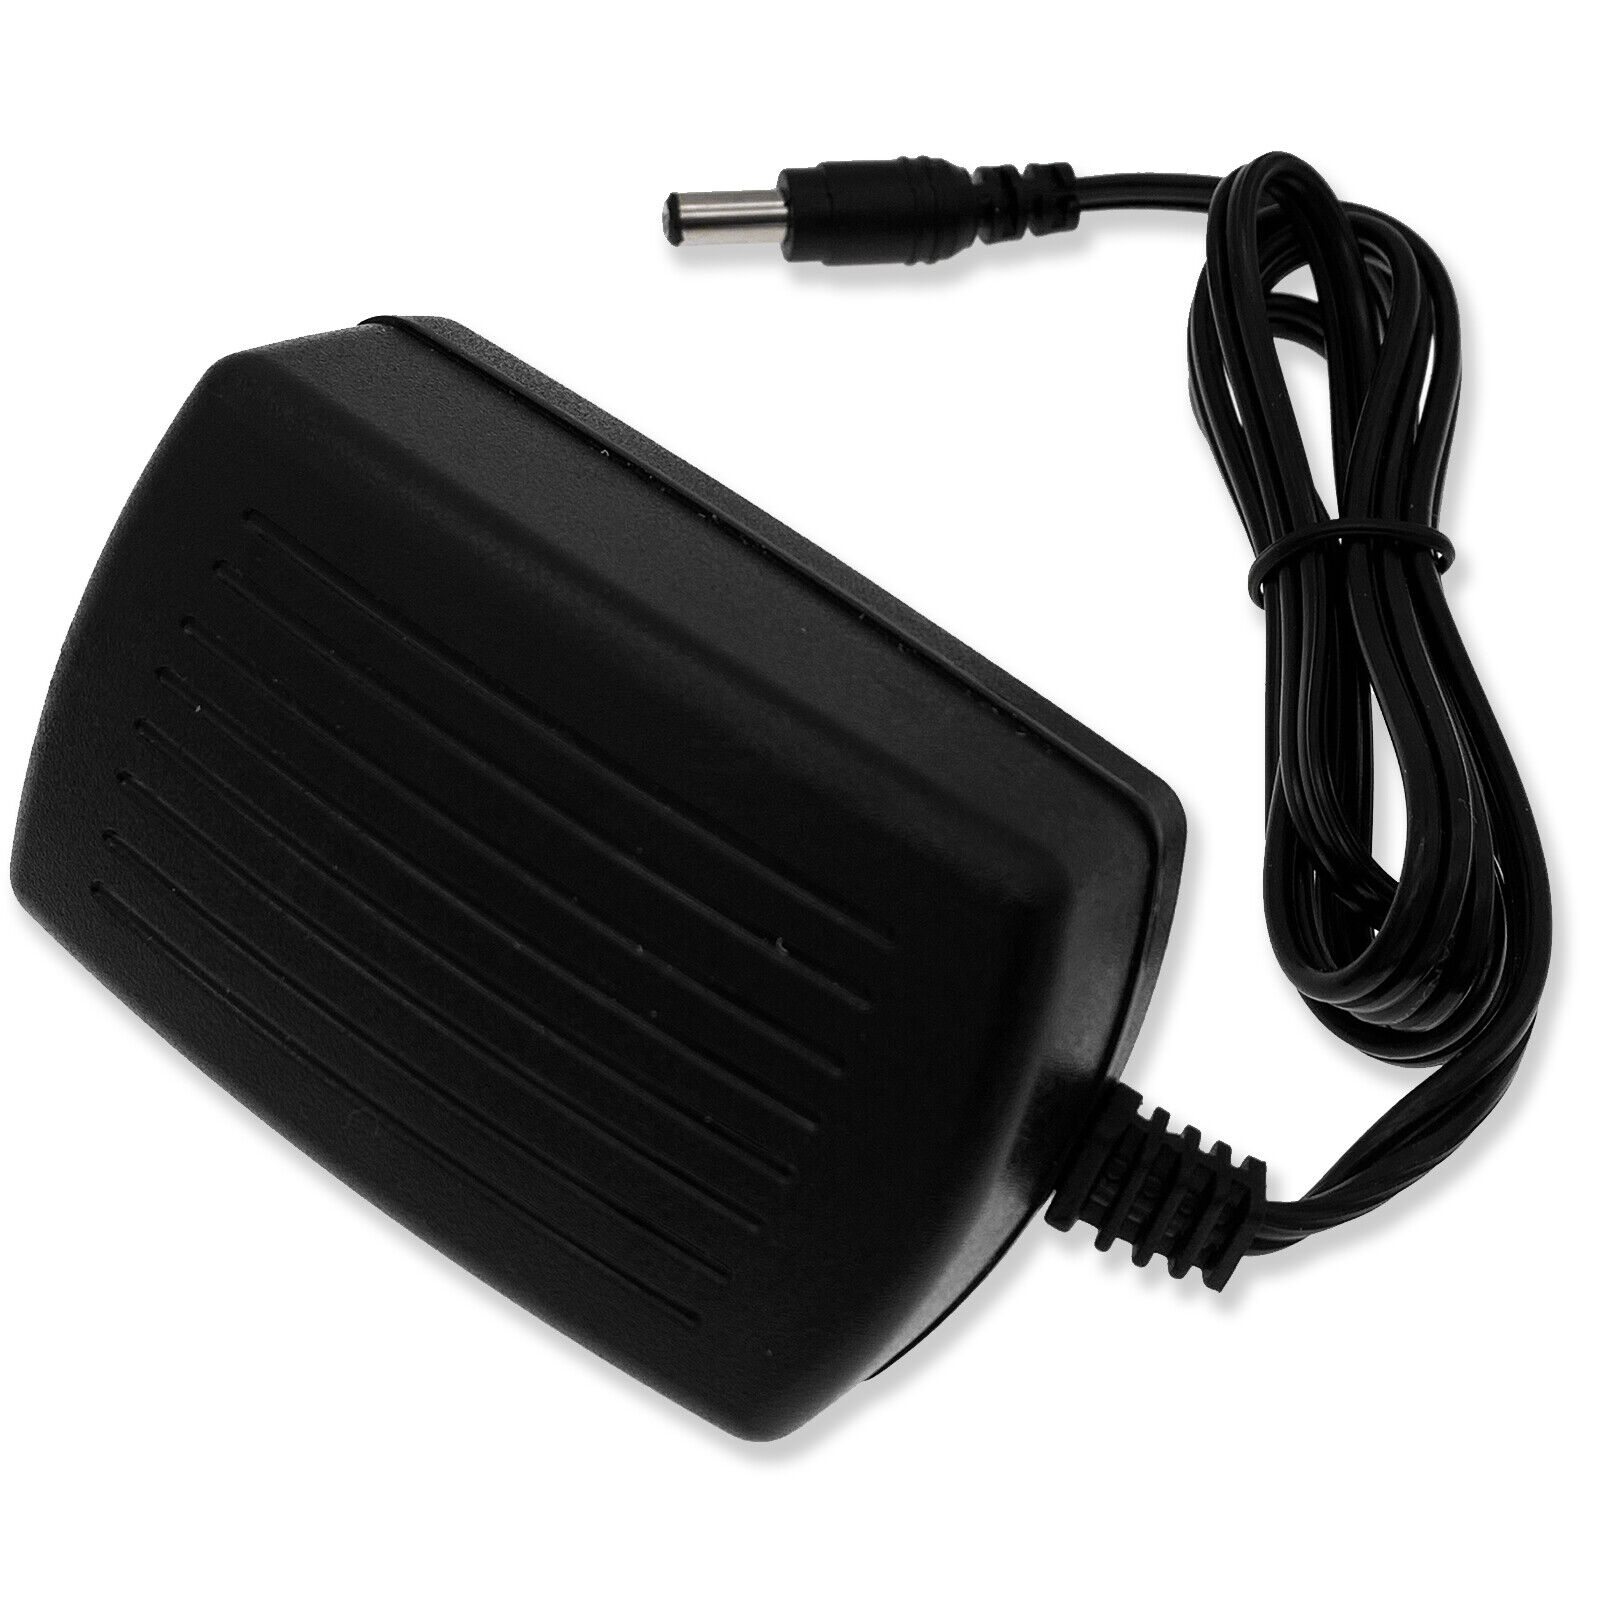 AC Charger Fit for Wahl Trimmer 9888L 9818L 9854L 9918D WNT-9 WNT- 9864 9876 9766 5622 5623 8779 796